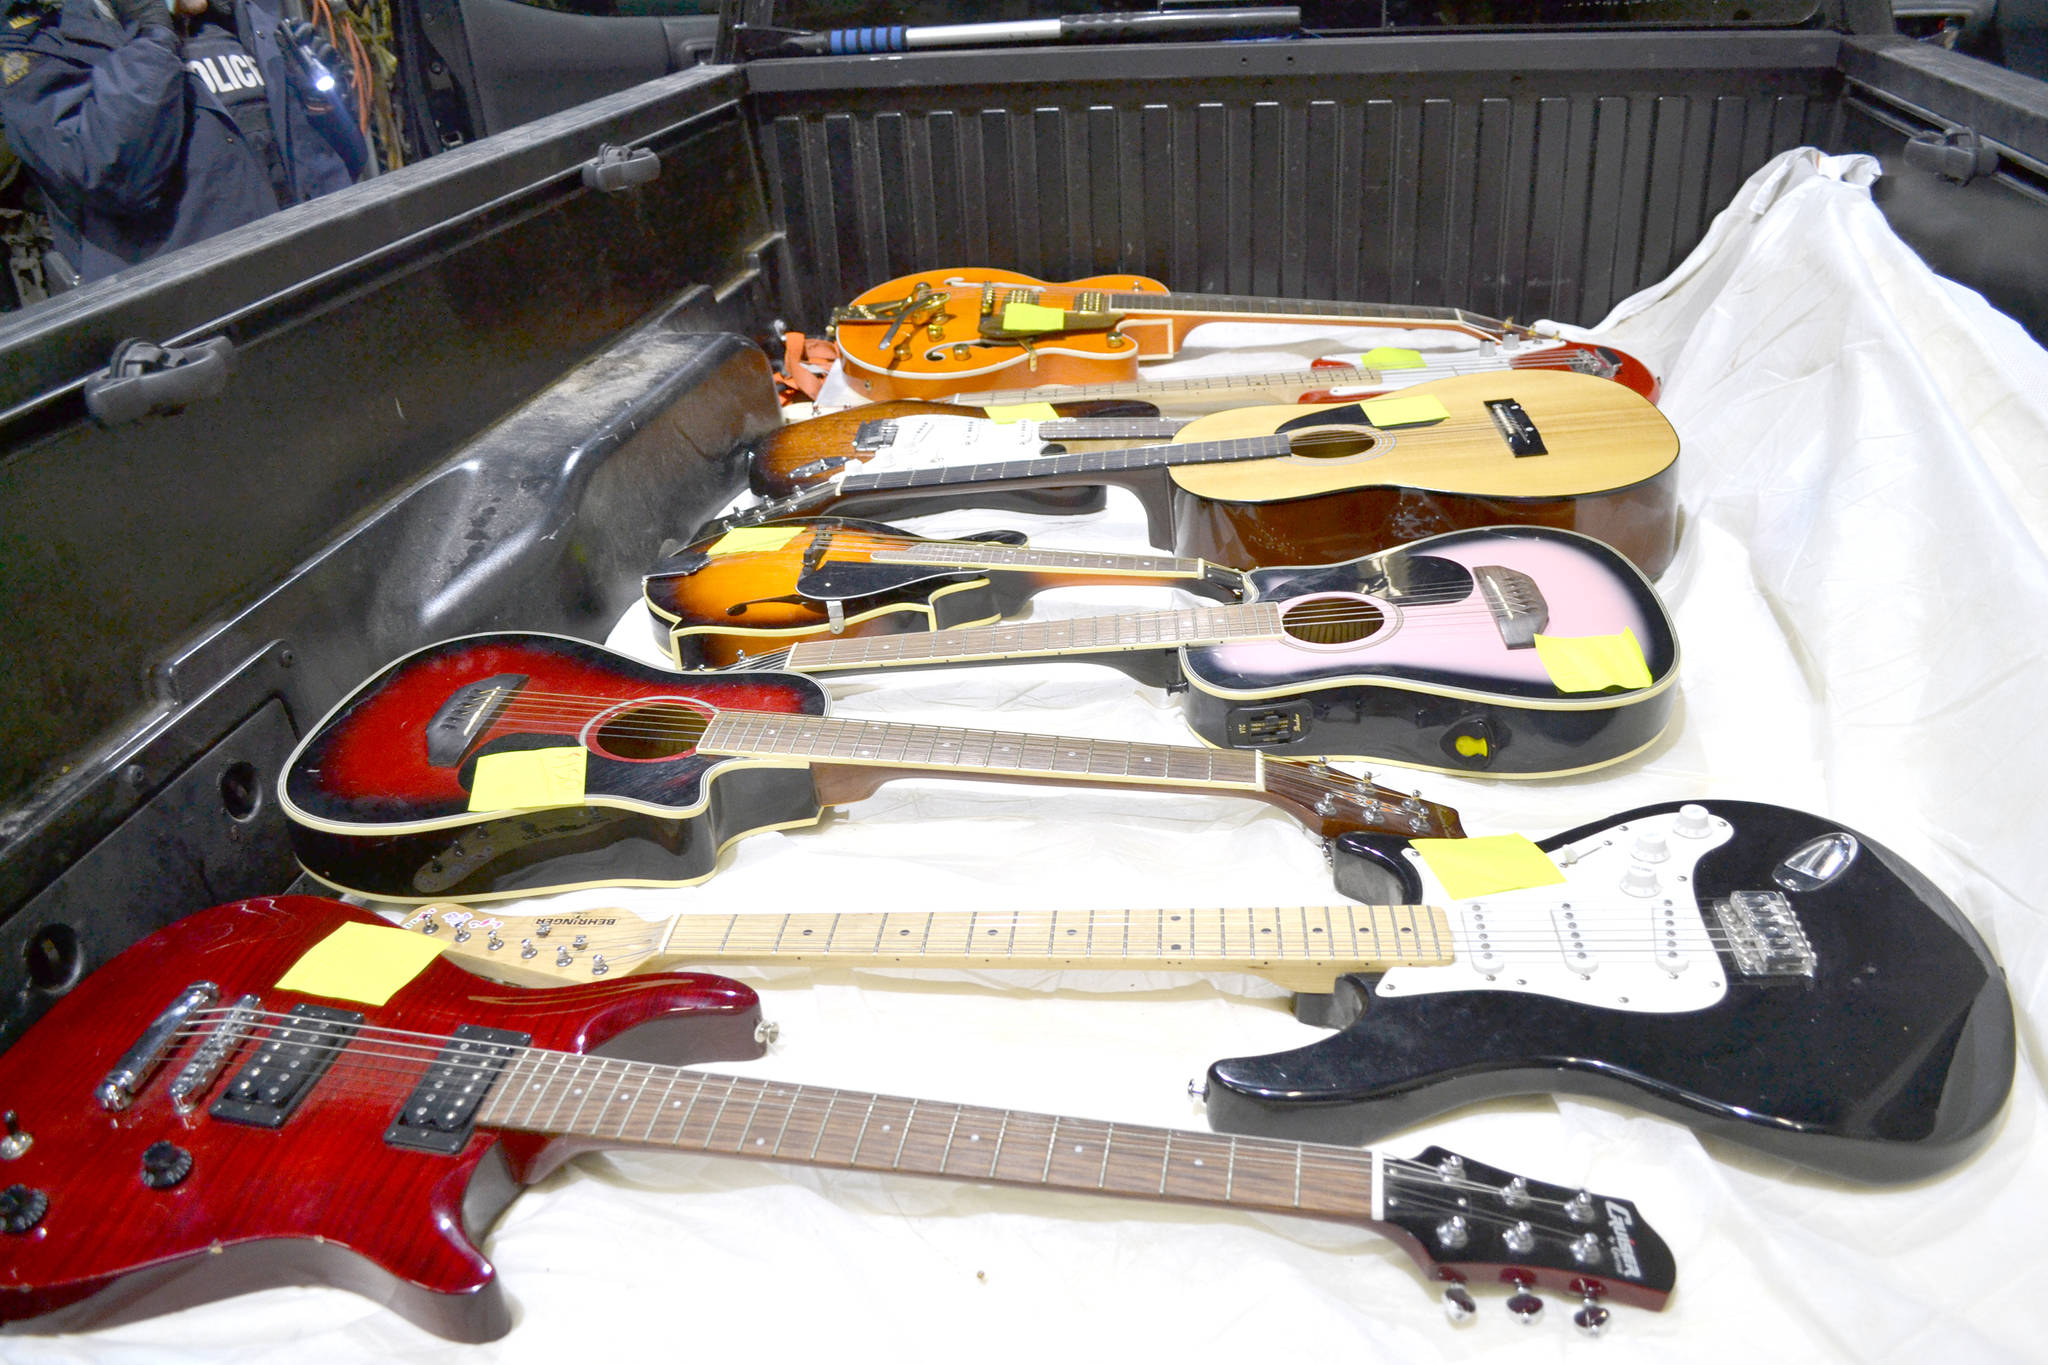 Undercover police officers and Innisfail RCMP recover $65,000 in musical instruments stolen from Red Deer County and charge two men. (RCMP photo)